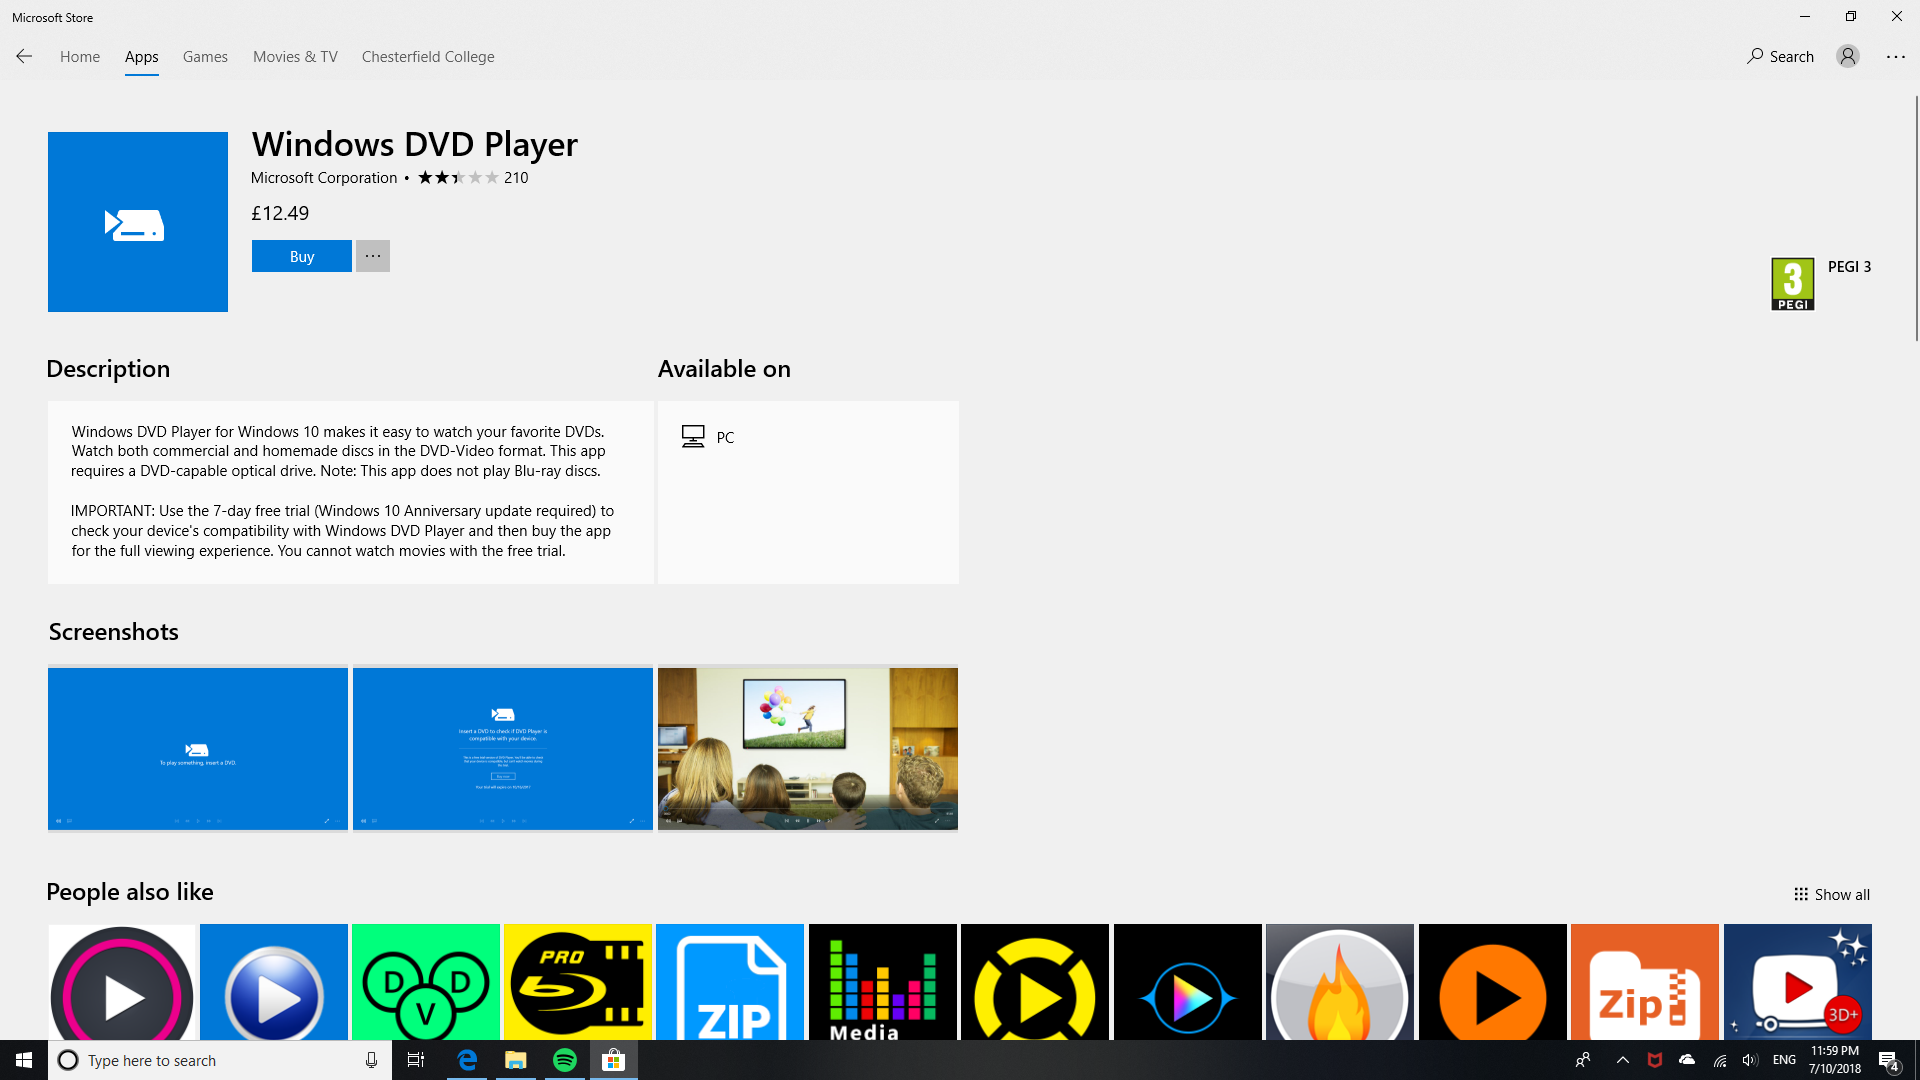 Windows DVD Player app released for Windows 10; will be free for